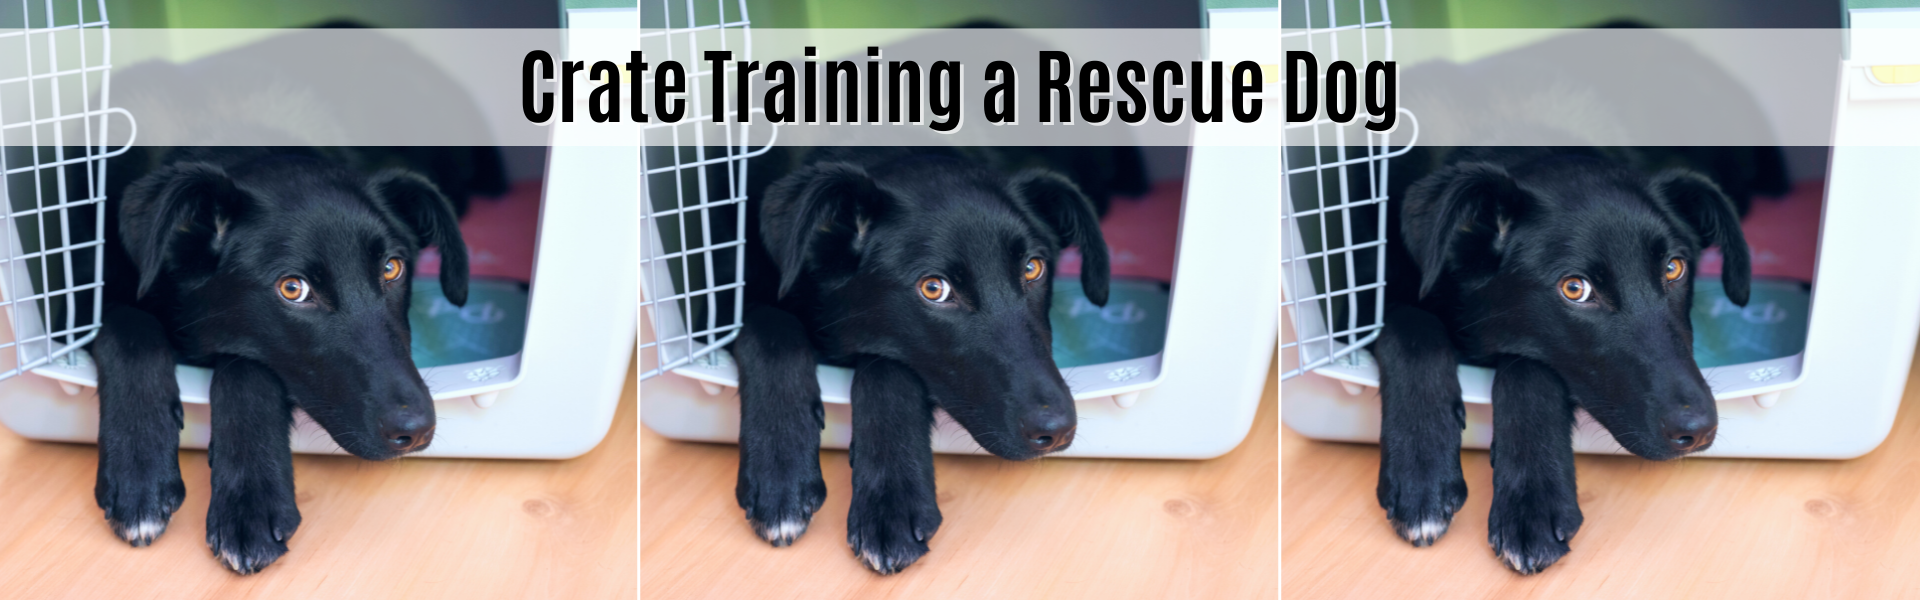 crate training a rescue dog